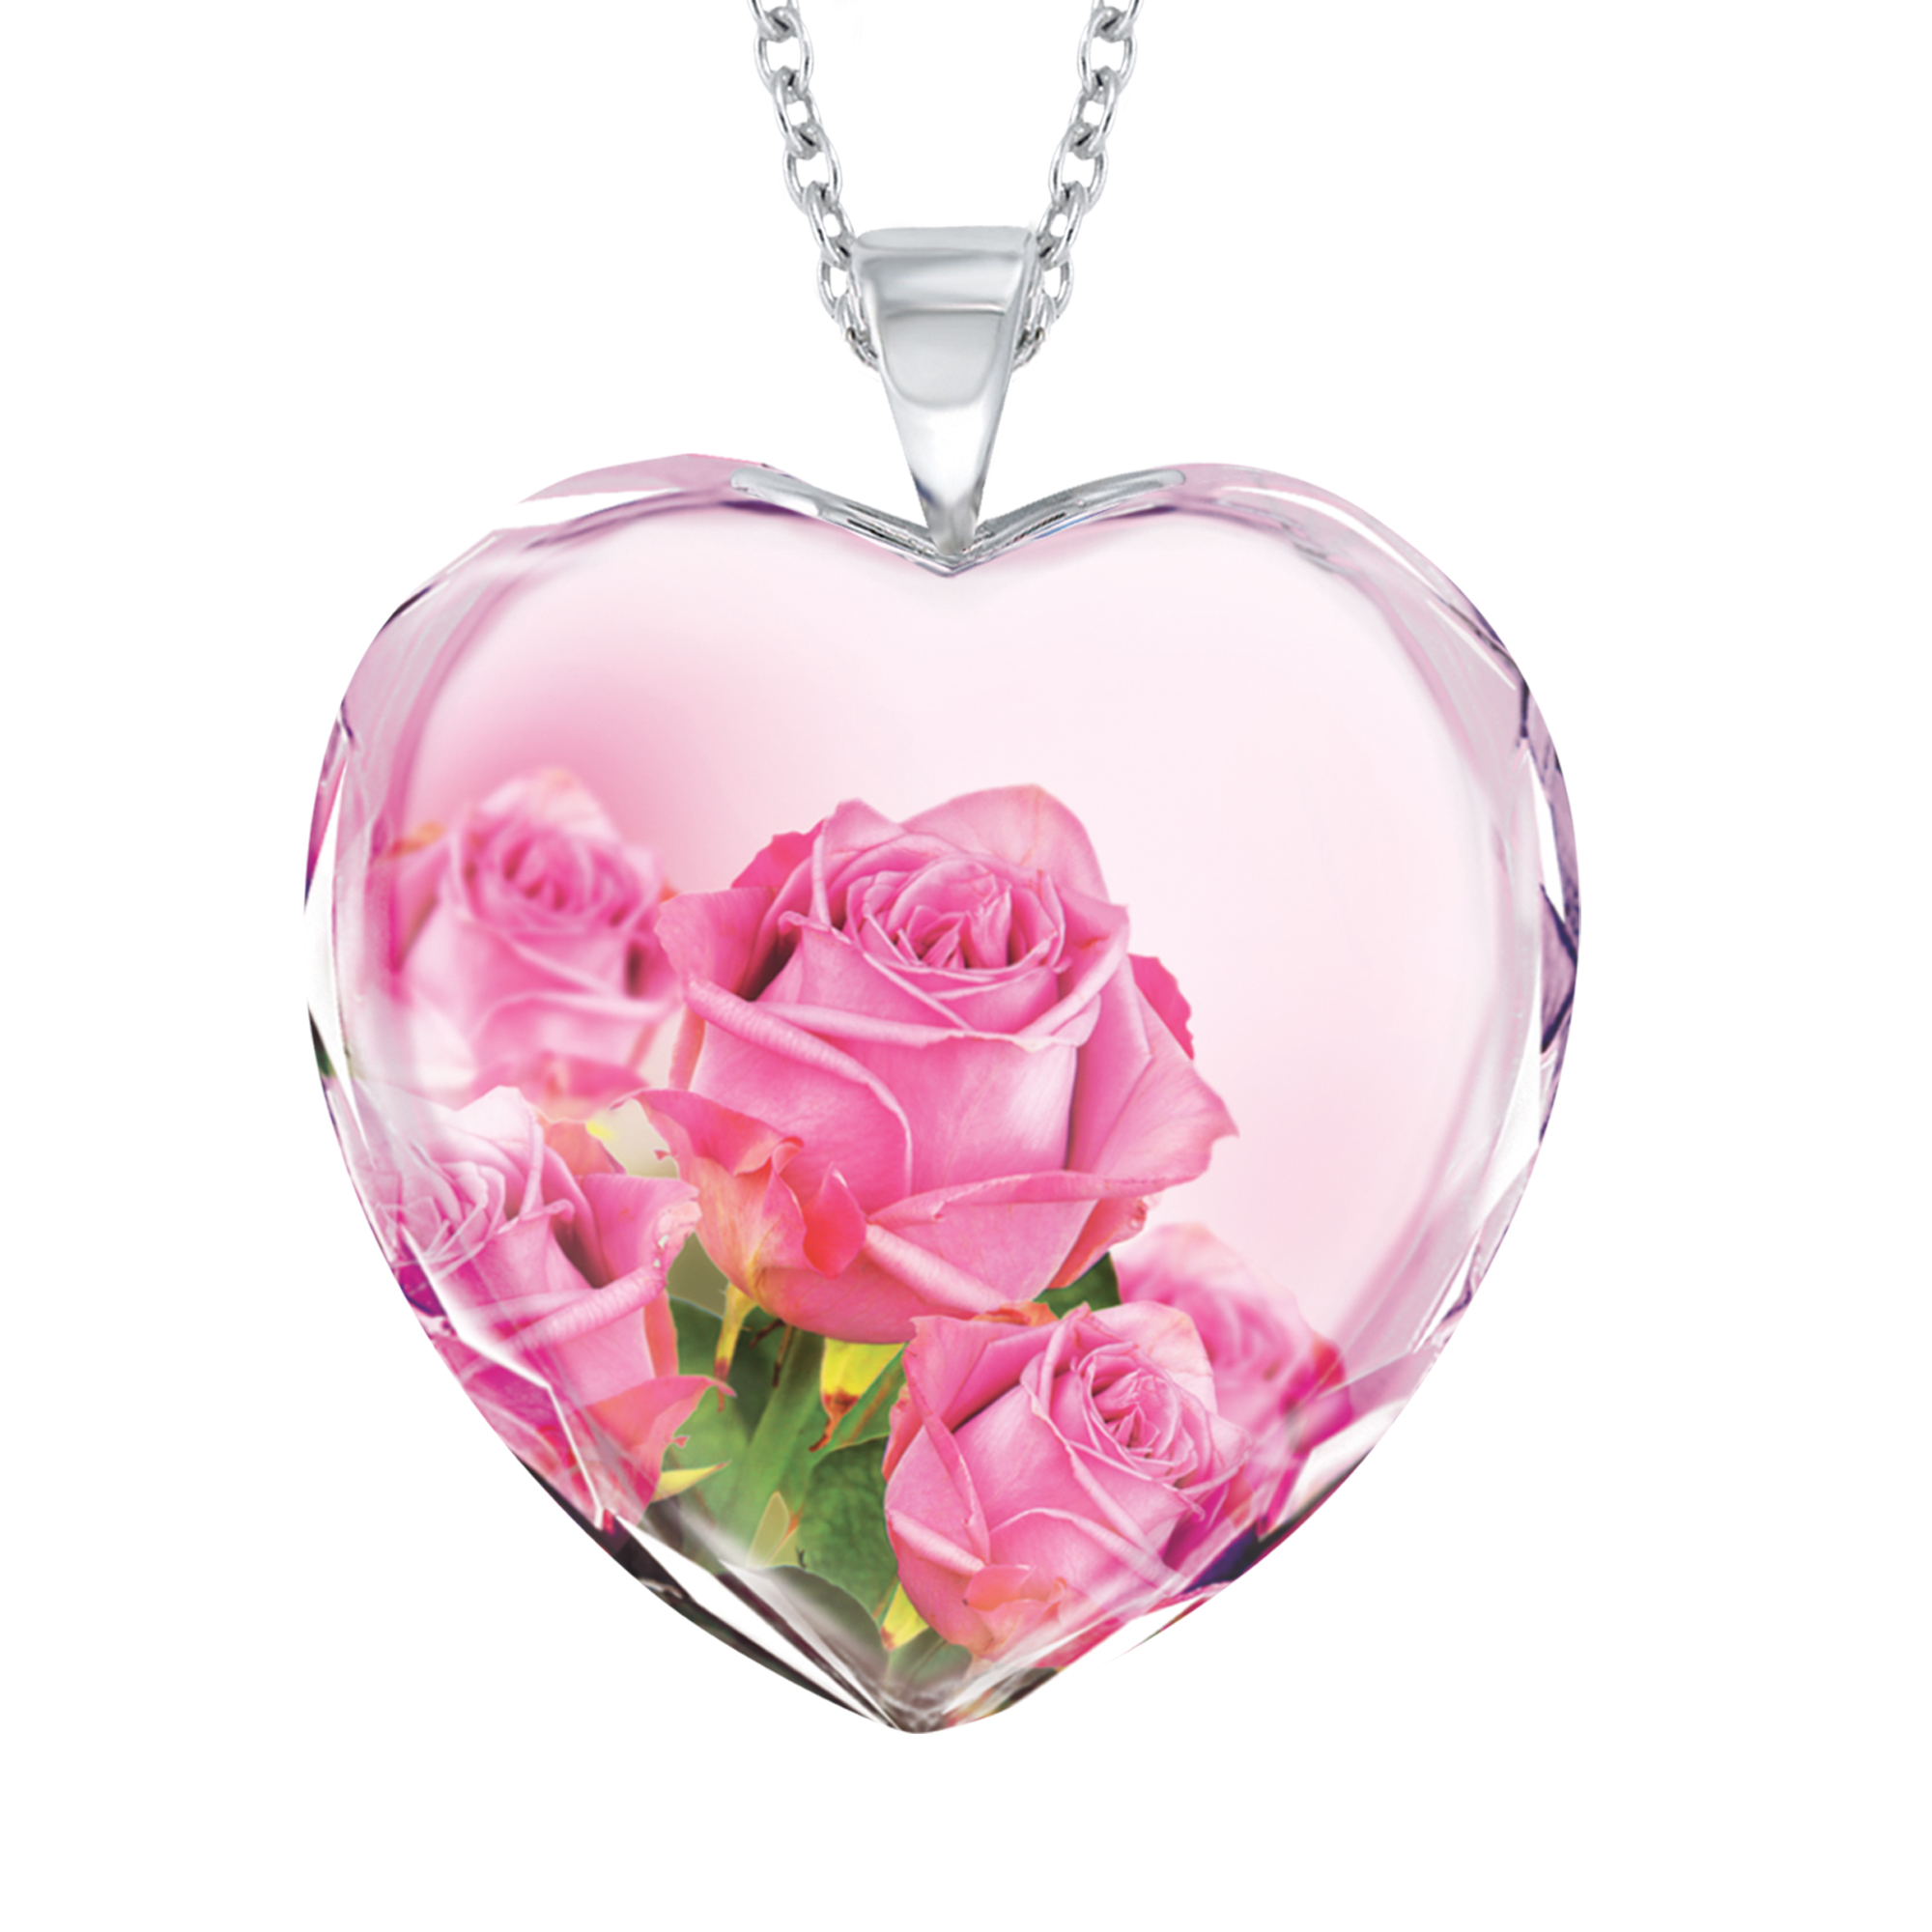 Brave Strong and Forever Loved Granddaughter Crystal Pendant 6964 0019 a main